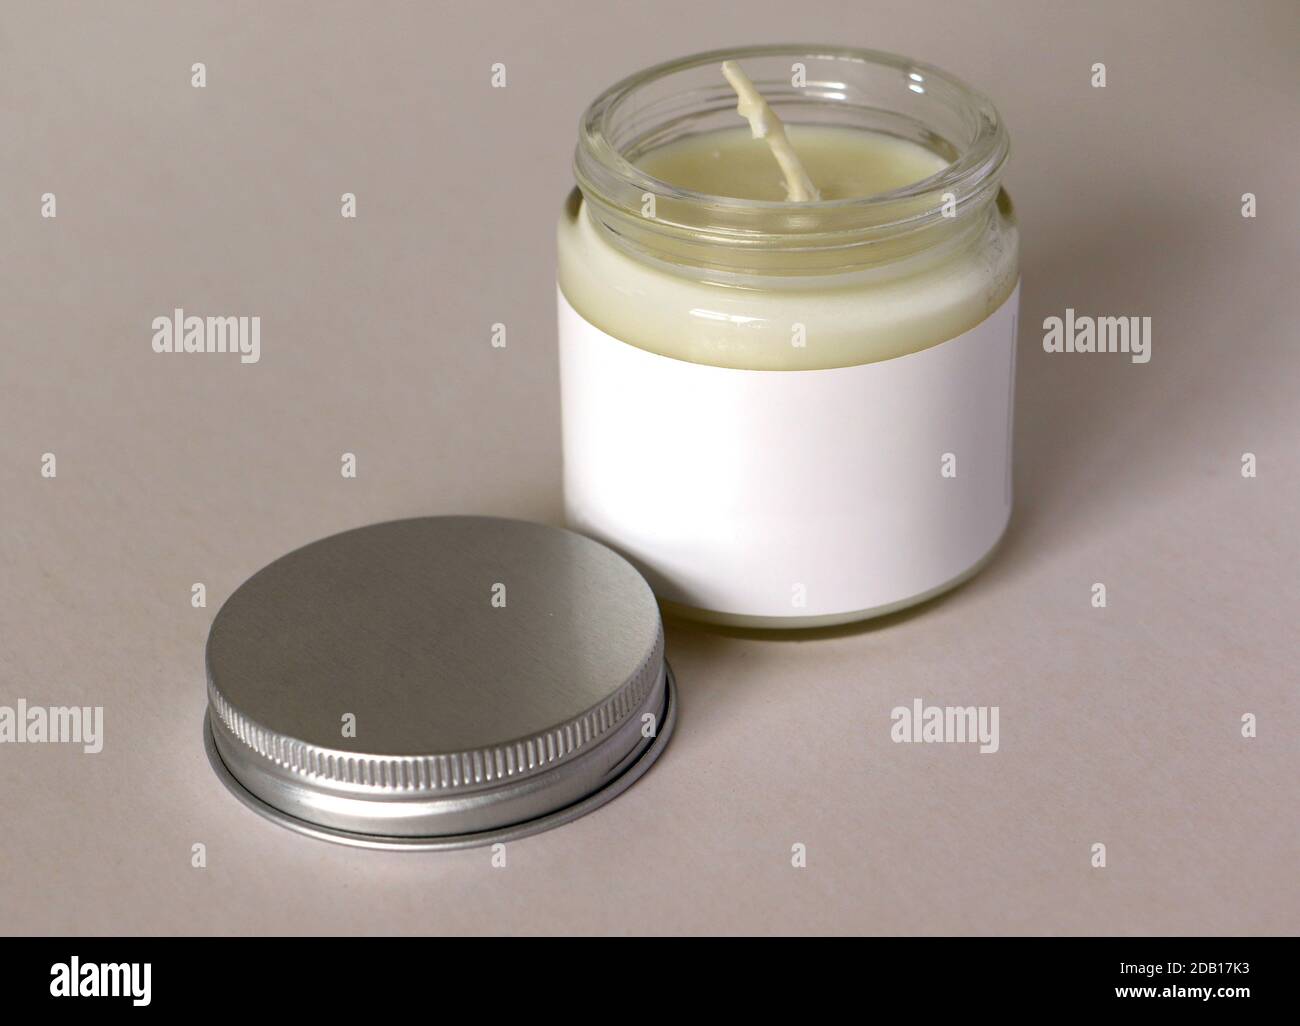 Glass jar with blank white label containing candle or creme Stock Photo